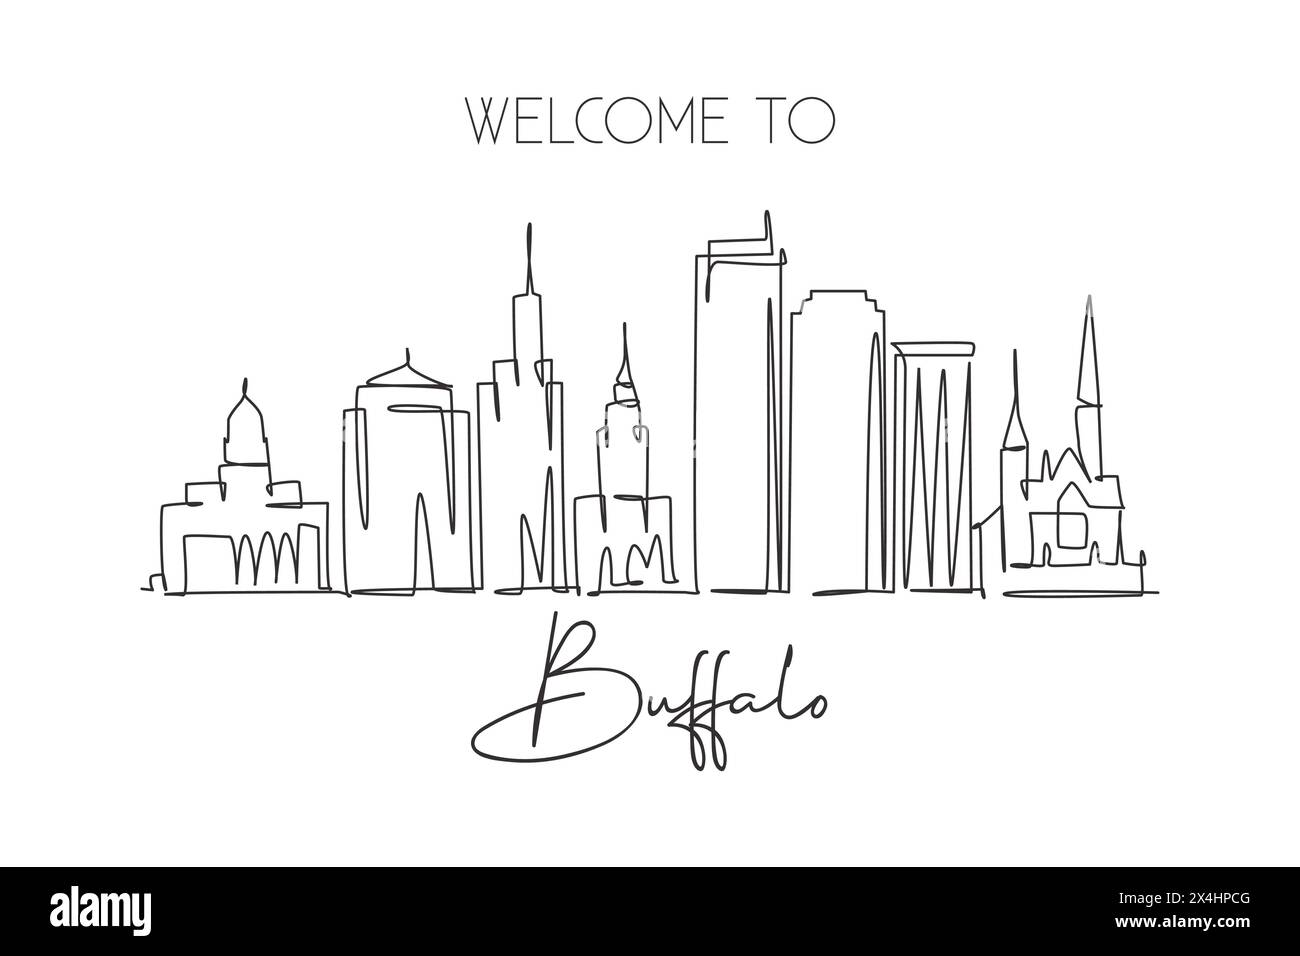 Single continuous line drawing of Buffalo city skyline, USA. Famous city scraper and landscape. World travel concept home wall decor poster print art. Stock Vector